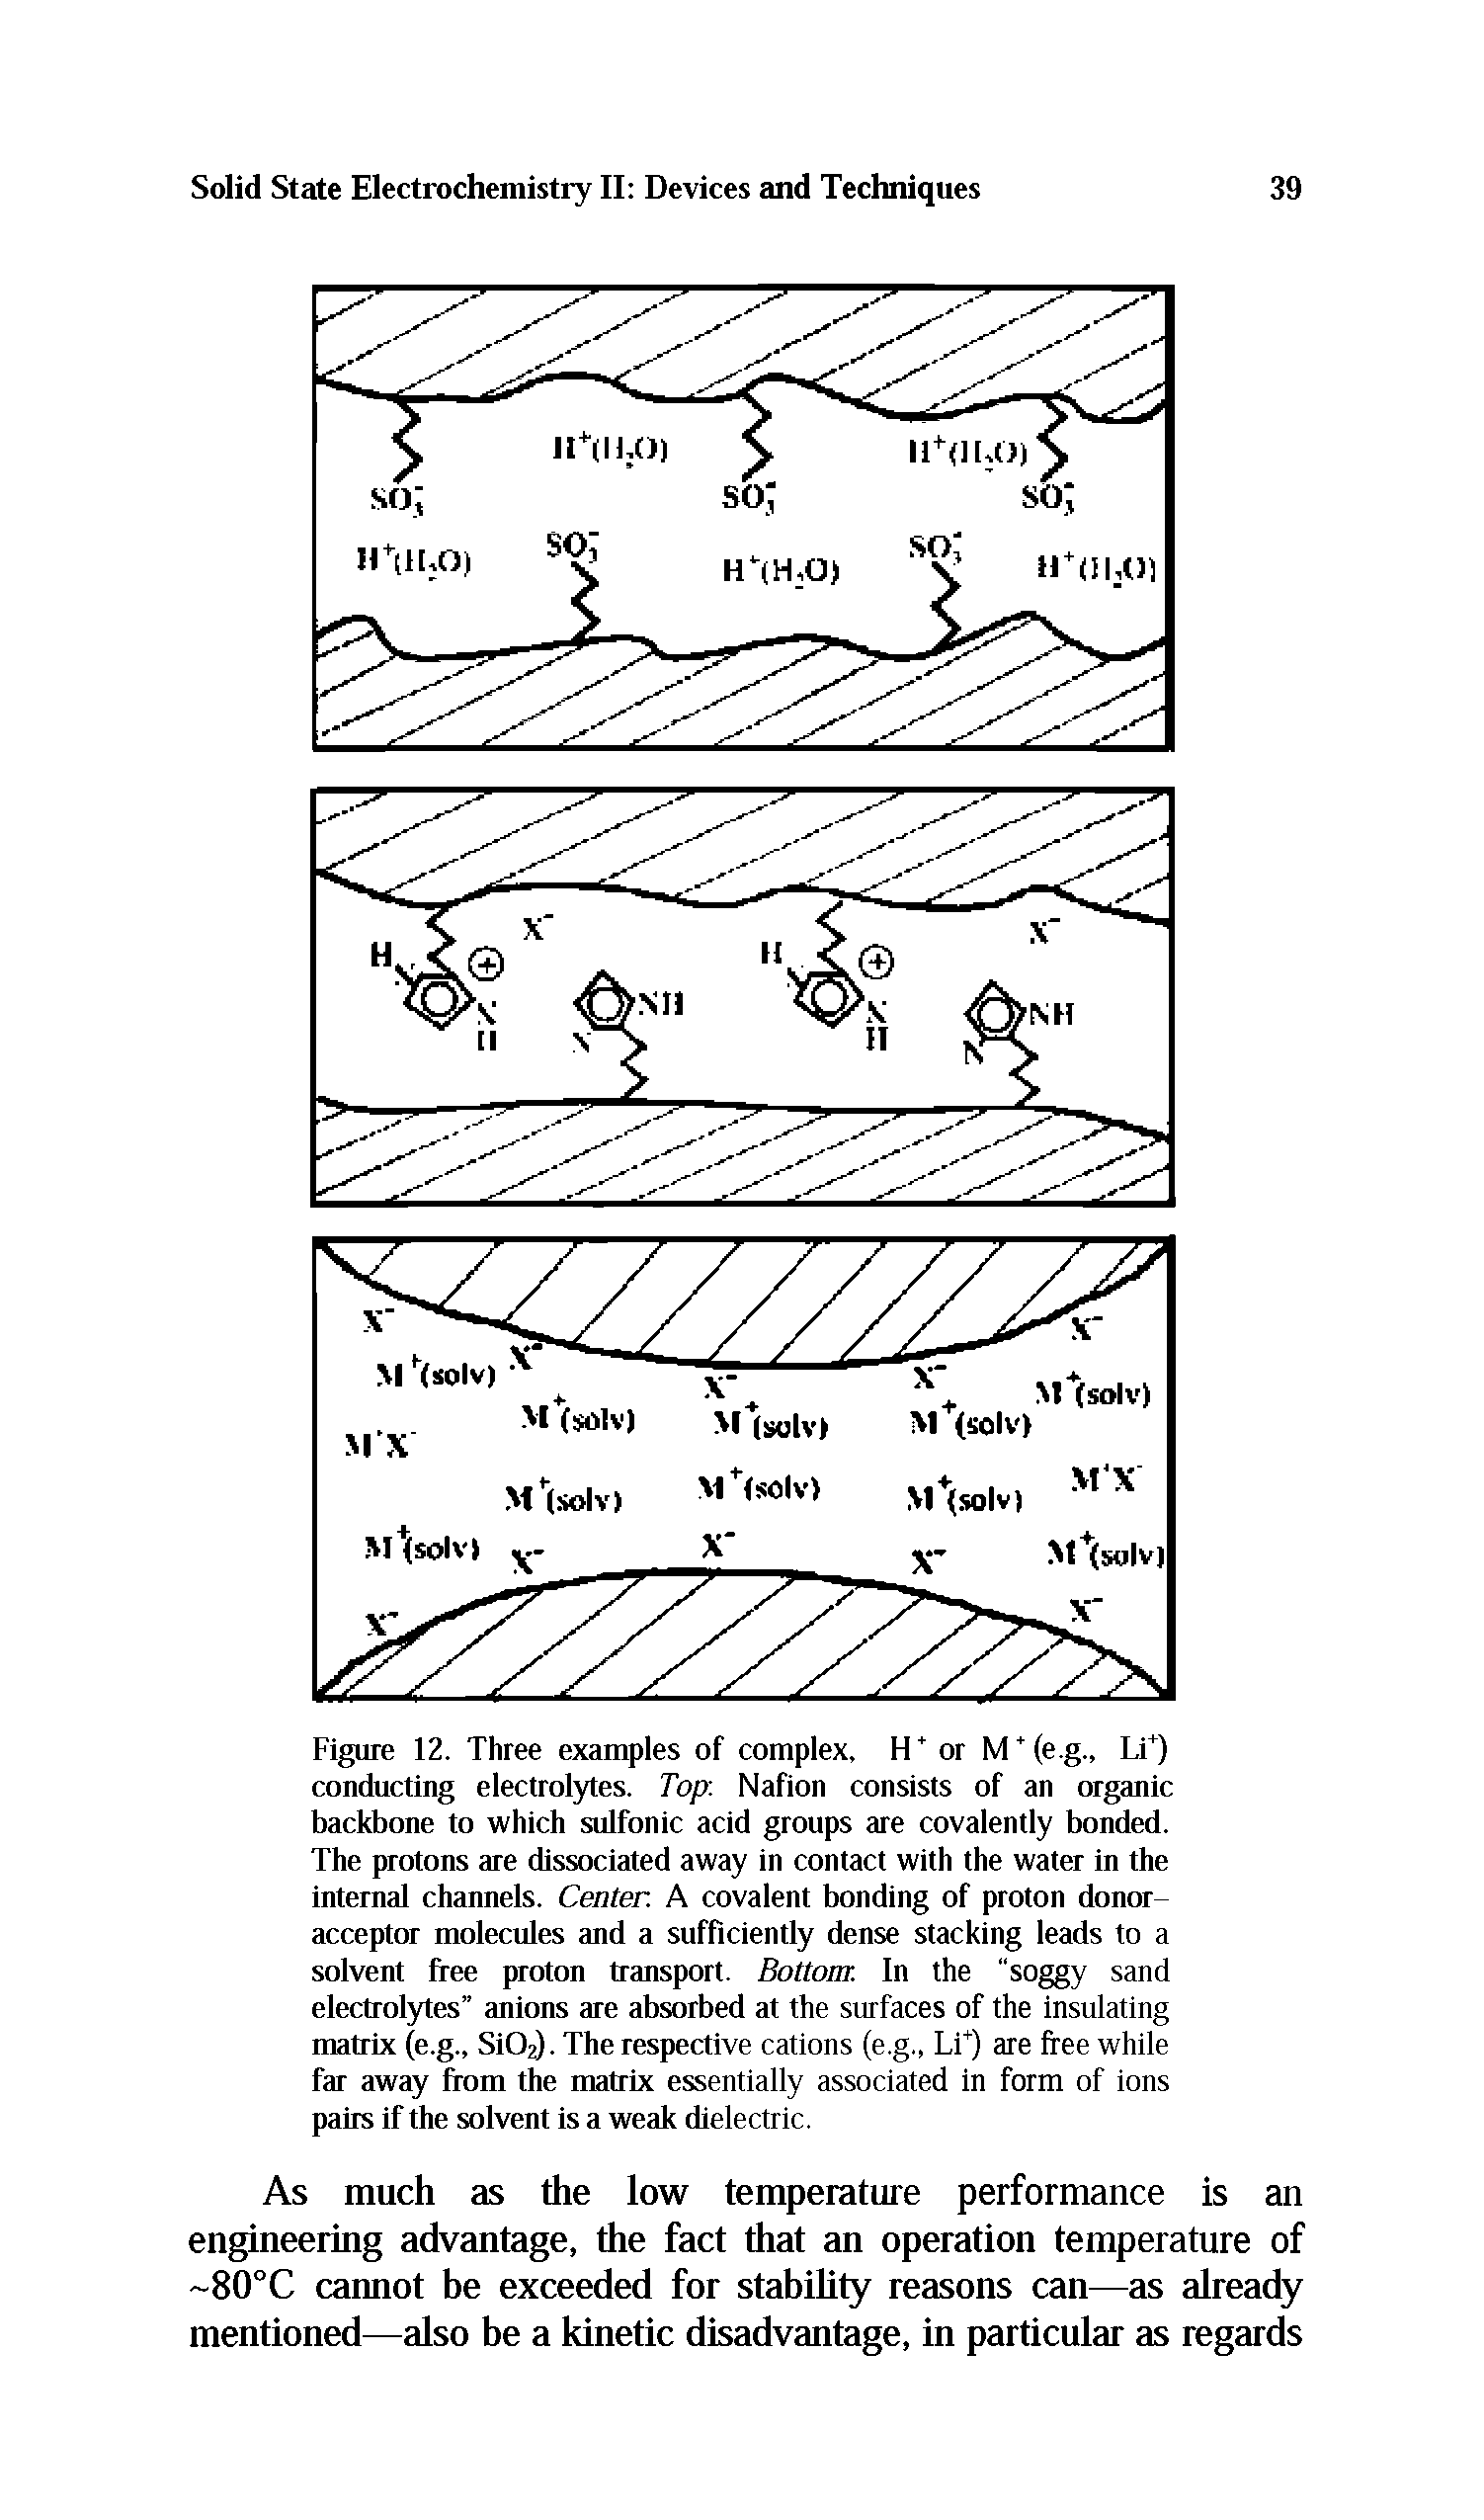 Figure 12. Three examples of complex, H or M (e g., Li+) conducting electrolytes. Top. Nafion consists of an organic backbone to which sulfonic acid groups are covalently bonded.